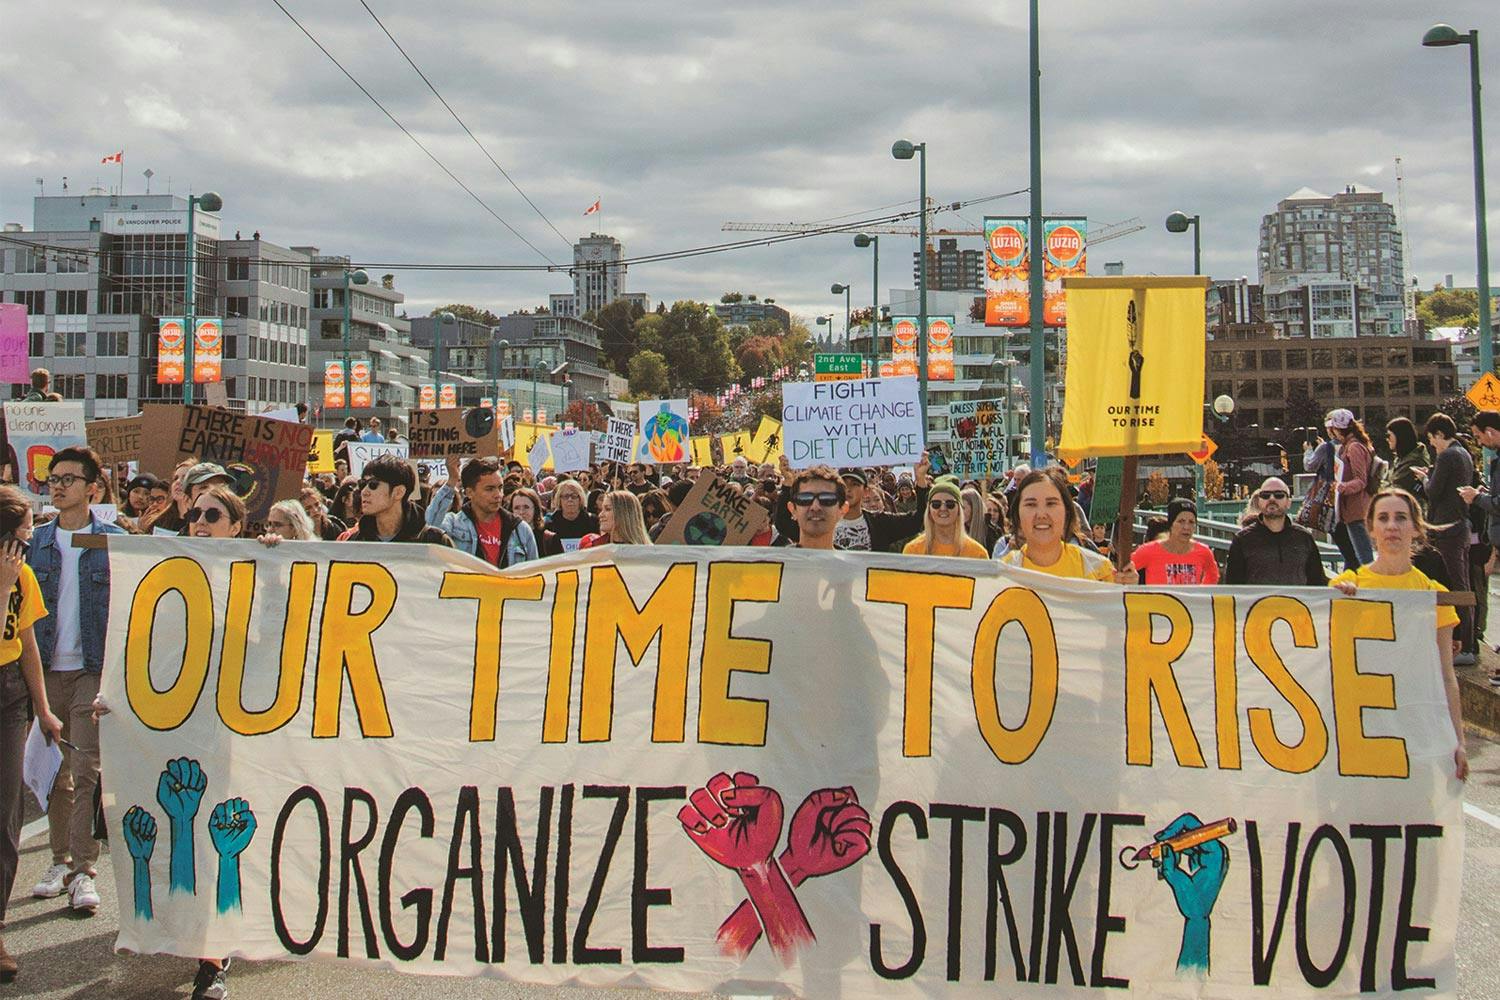 Activists lead a crowd across Vancouver’s Cambie Bridge with a banner that says “Our time to rise. Organize, Strike, Vote.”